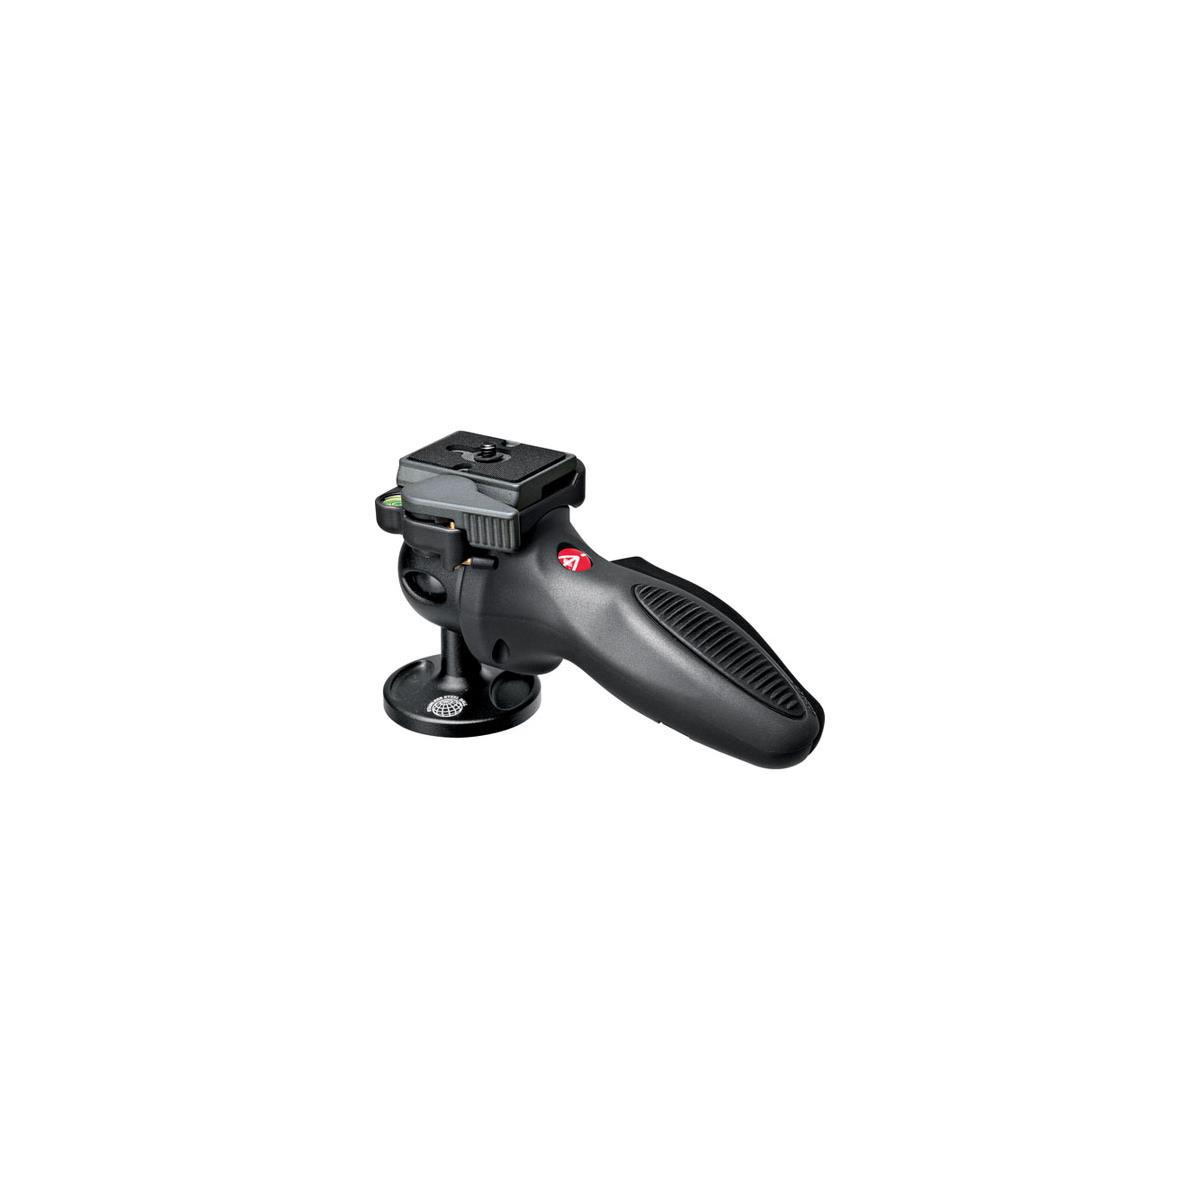 Image of Manfrotto 324RC2 Joystick Grip Ball Head with Quick Release Plate